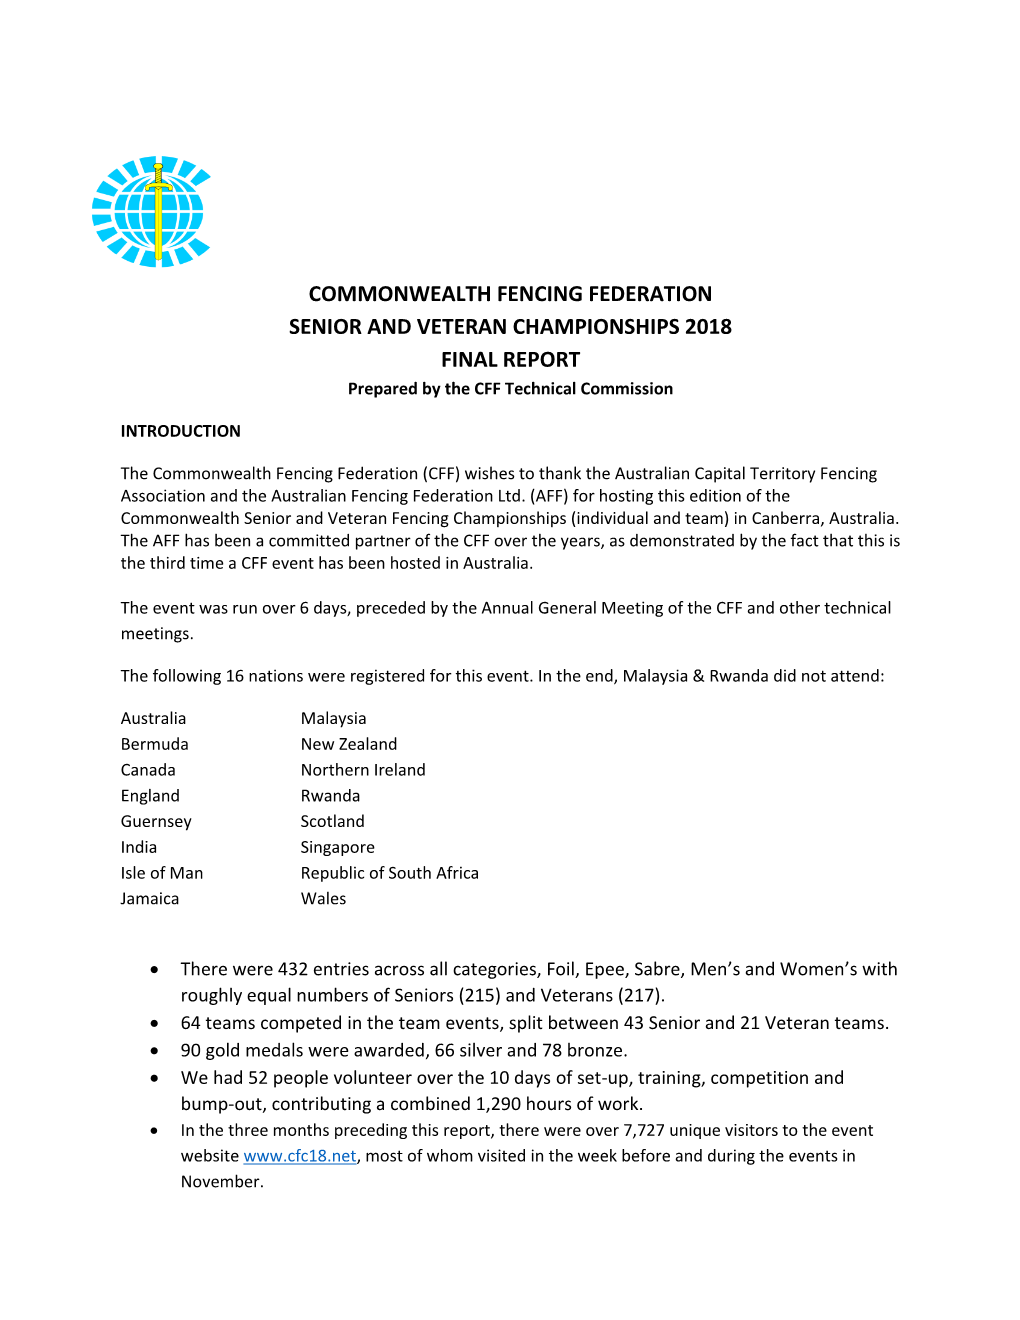 COMMONWEALTH FENCING FEDERATION SENIOR and VETERAN CHAMPIONSHIPS 2018 FINAL REPORT Prepared by the CFF Technical Commission